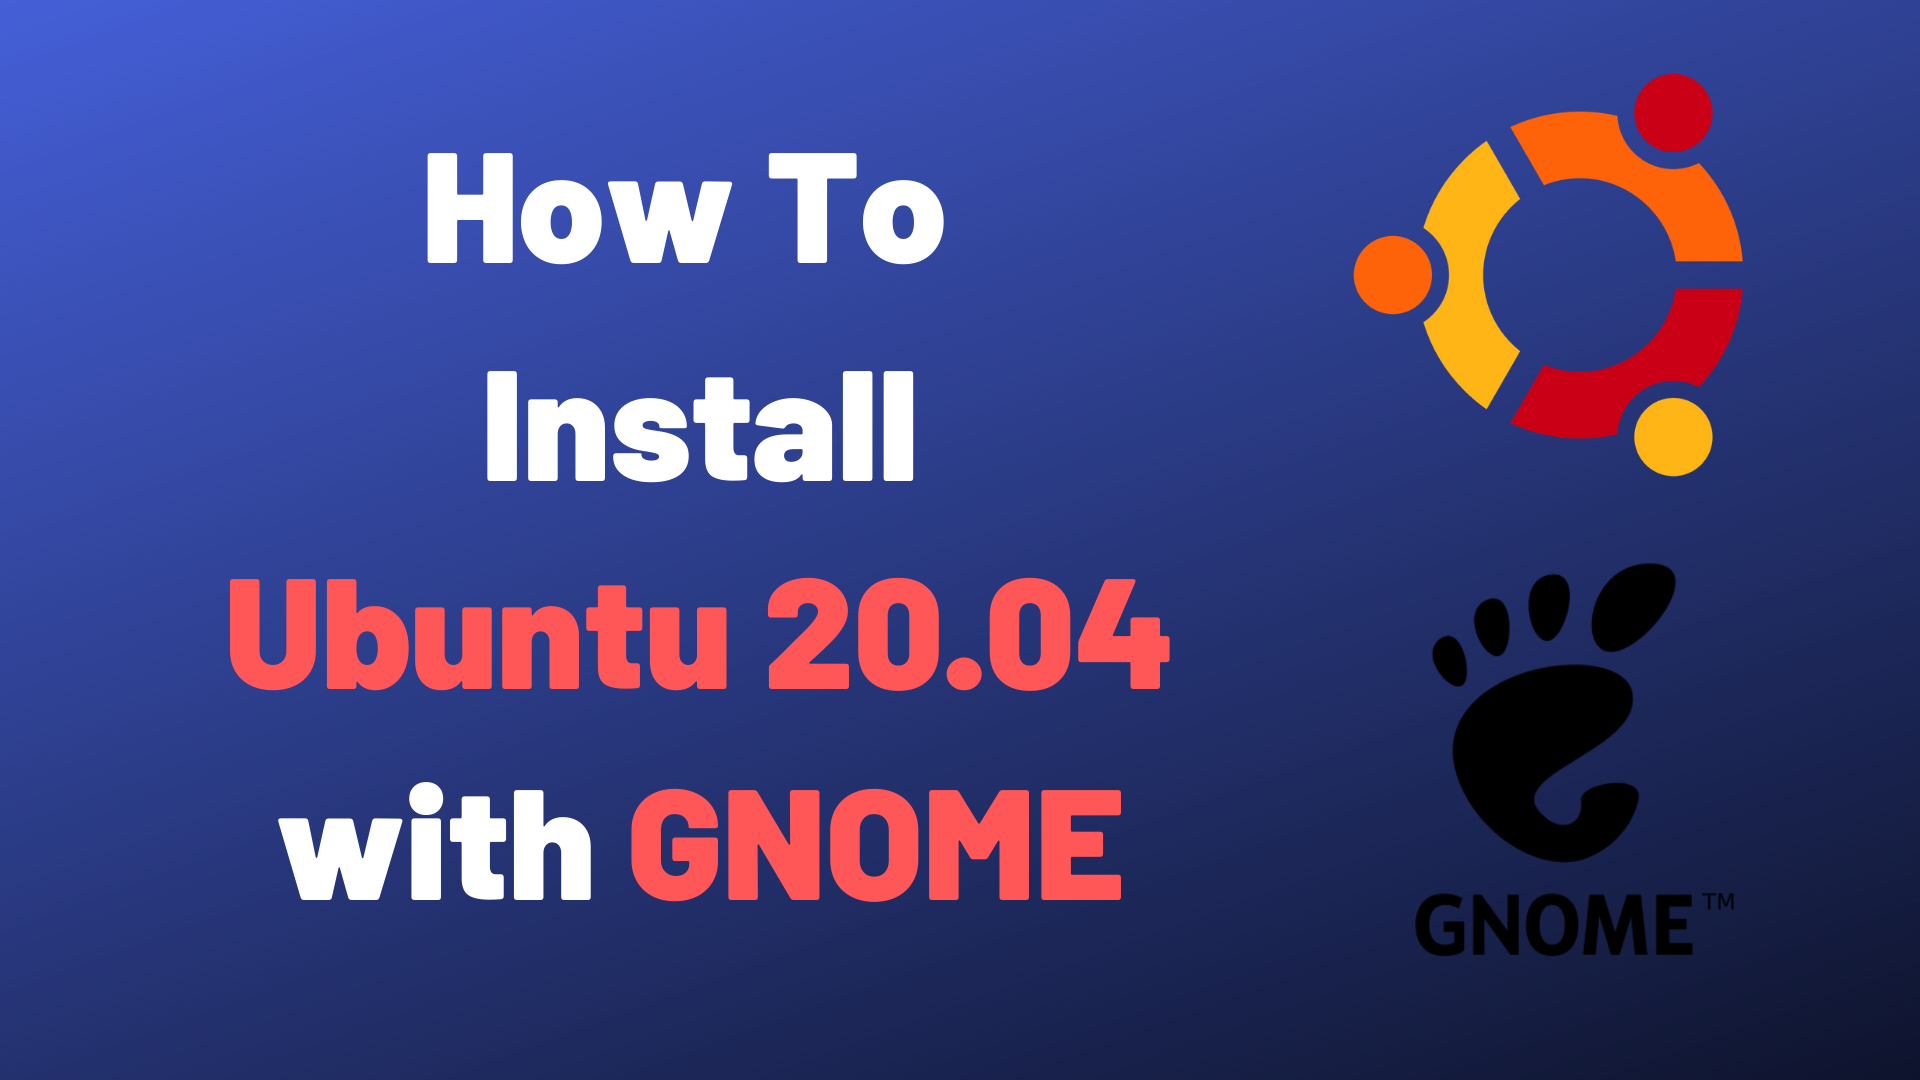 How To Install and Configure Ubuntu 20.04 with GNOME